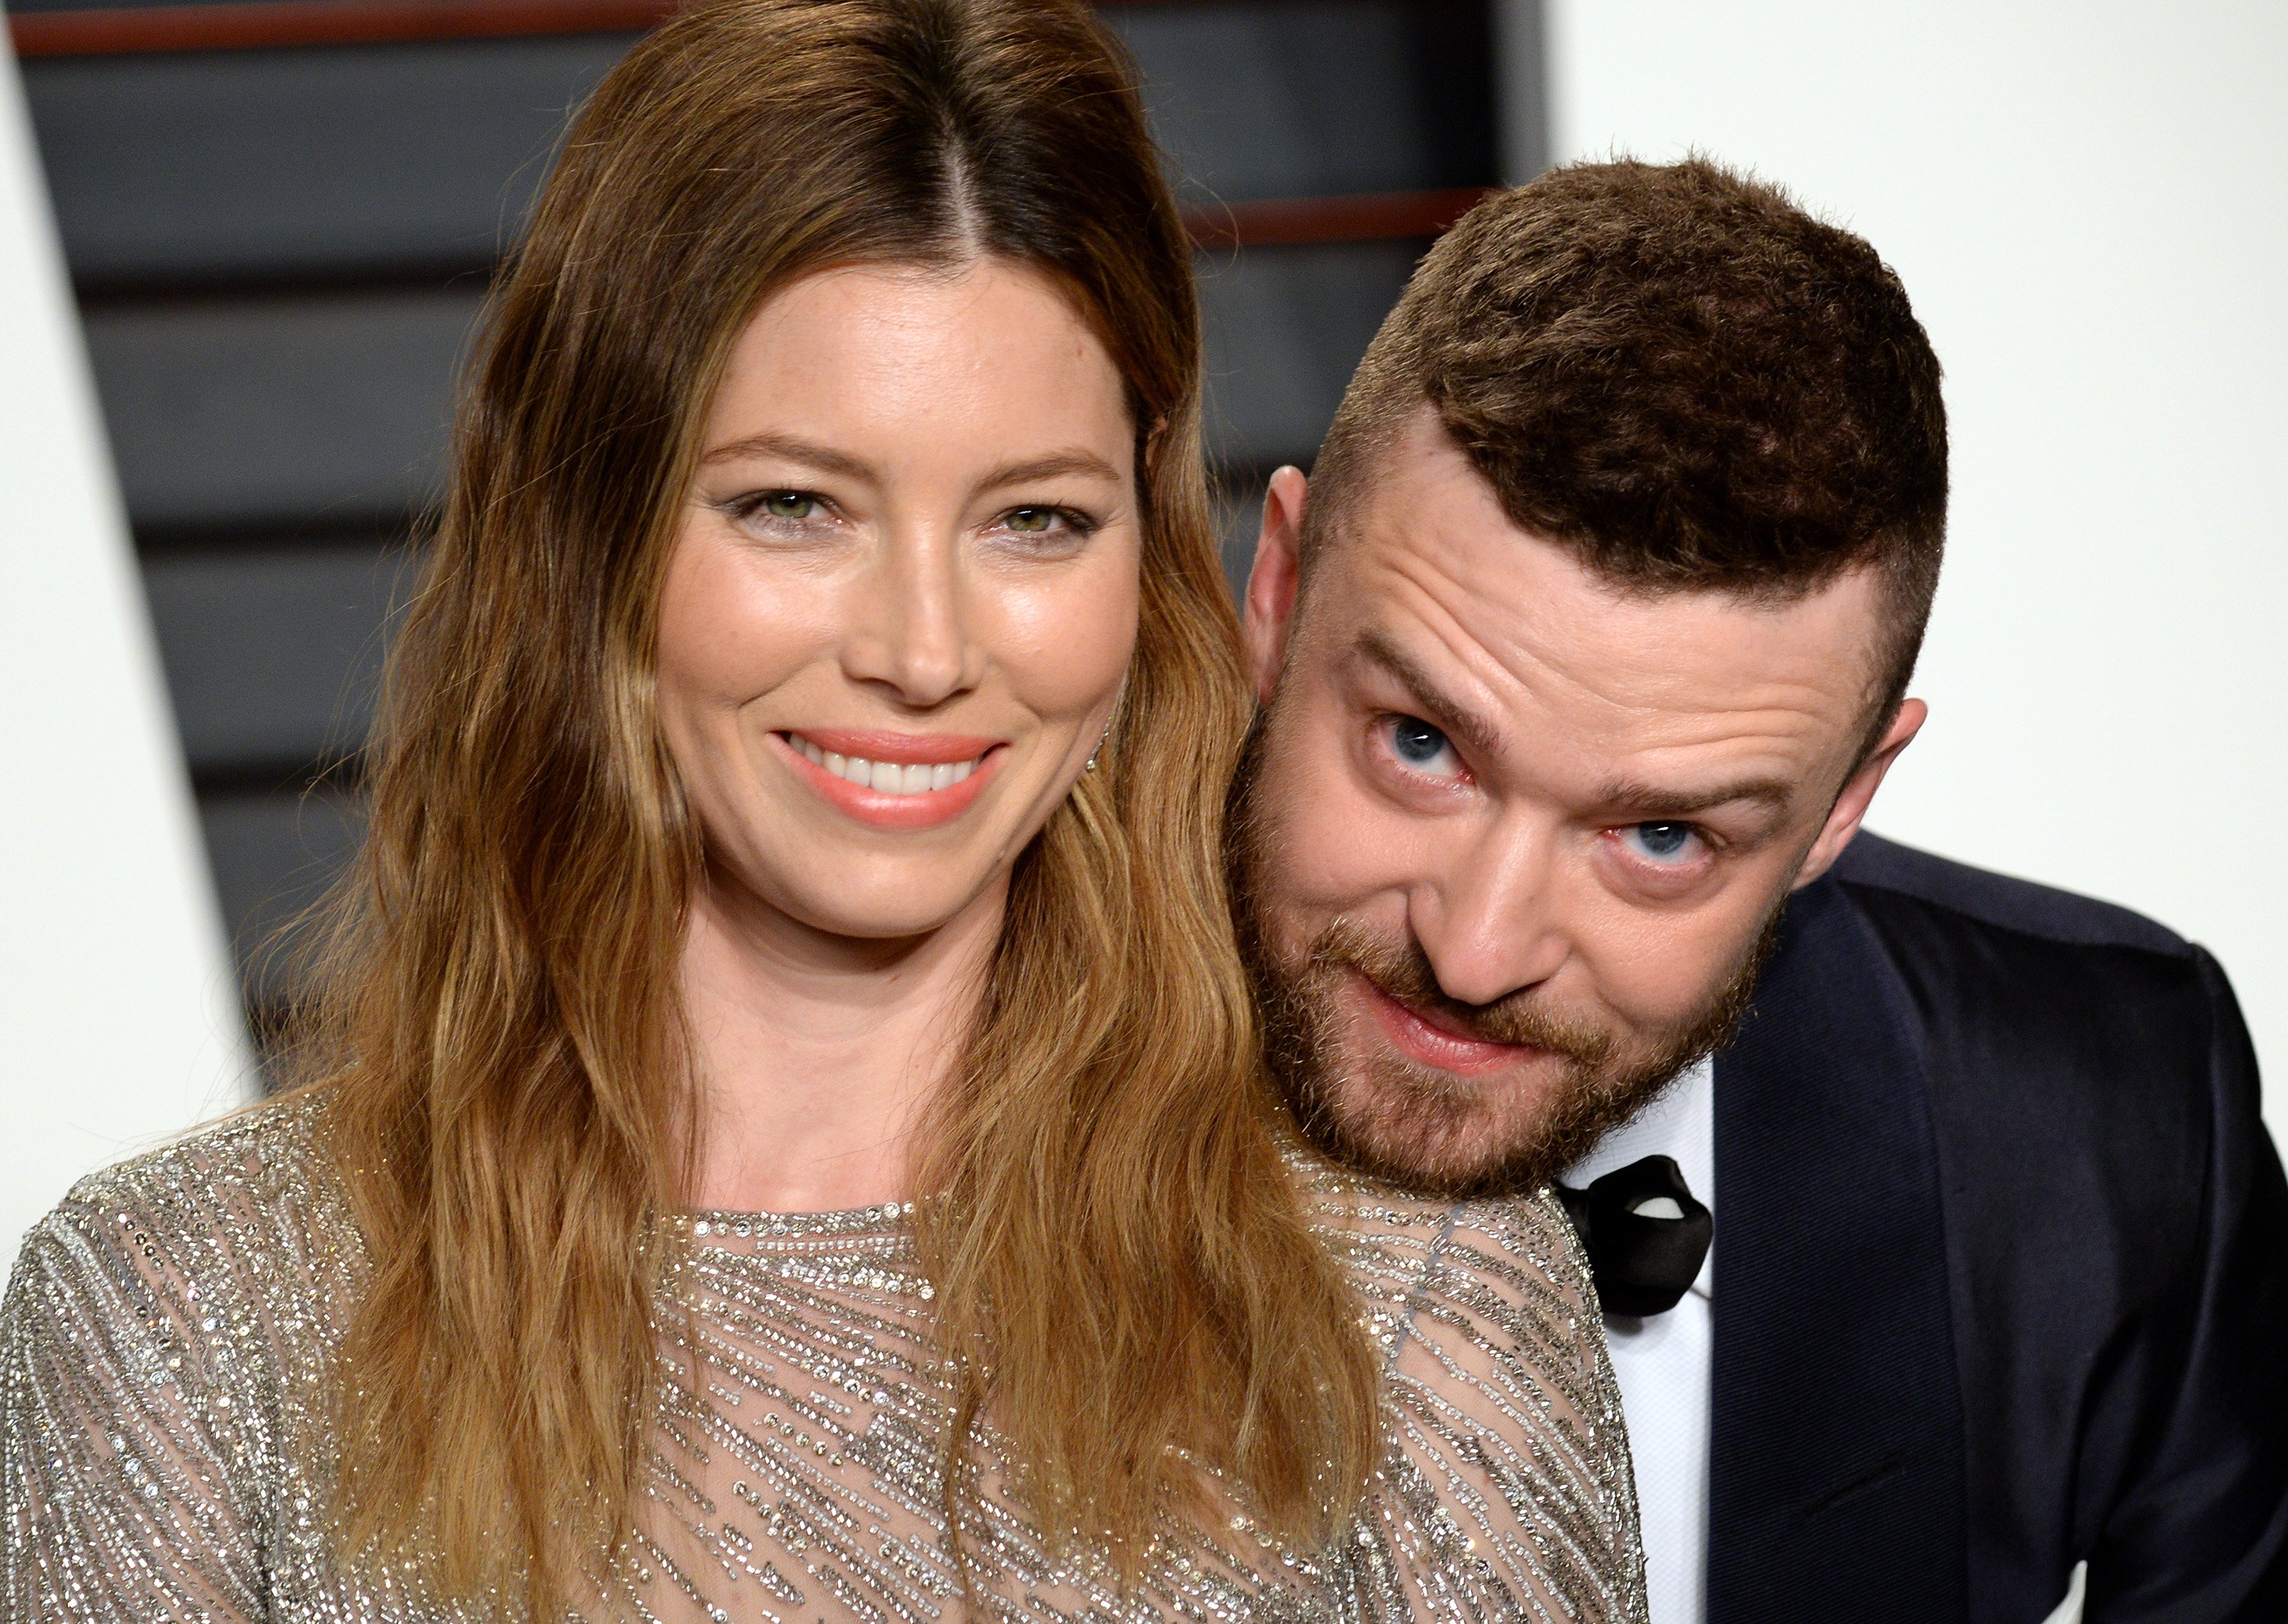 Jessica Biel and Justin Timberlake attend the 2016 Vanity Fair Oscar Party hosted By Graydon Carter at Wallis Annenberg Center for the Performing Arts on February 28, 2016, in Beverly Hills, California. | Source: Getty Images